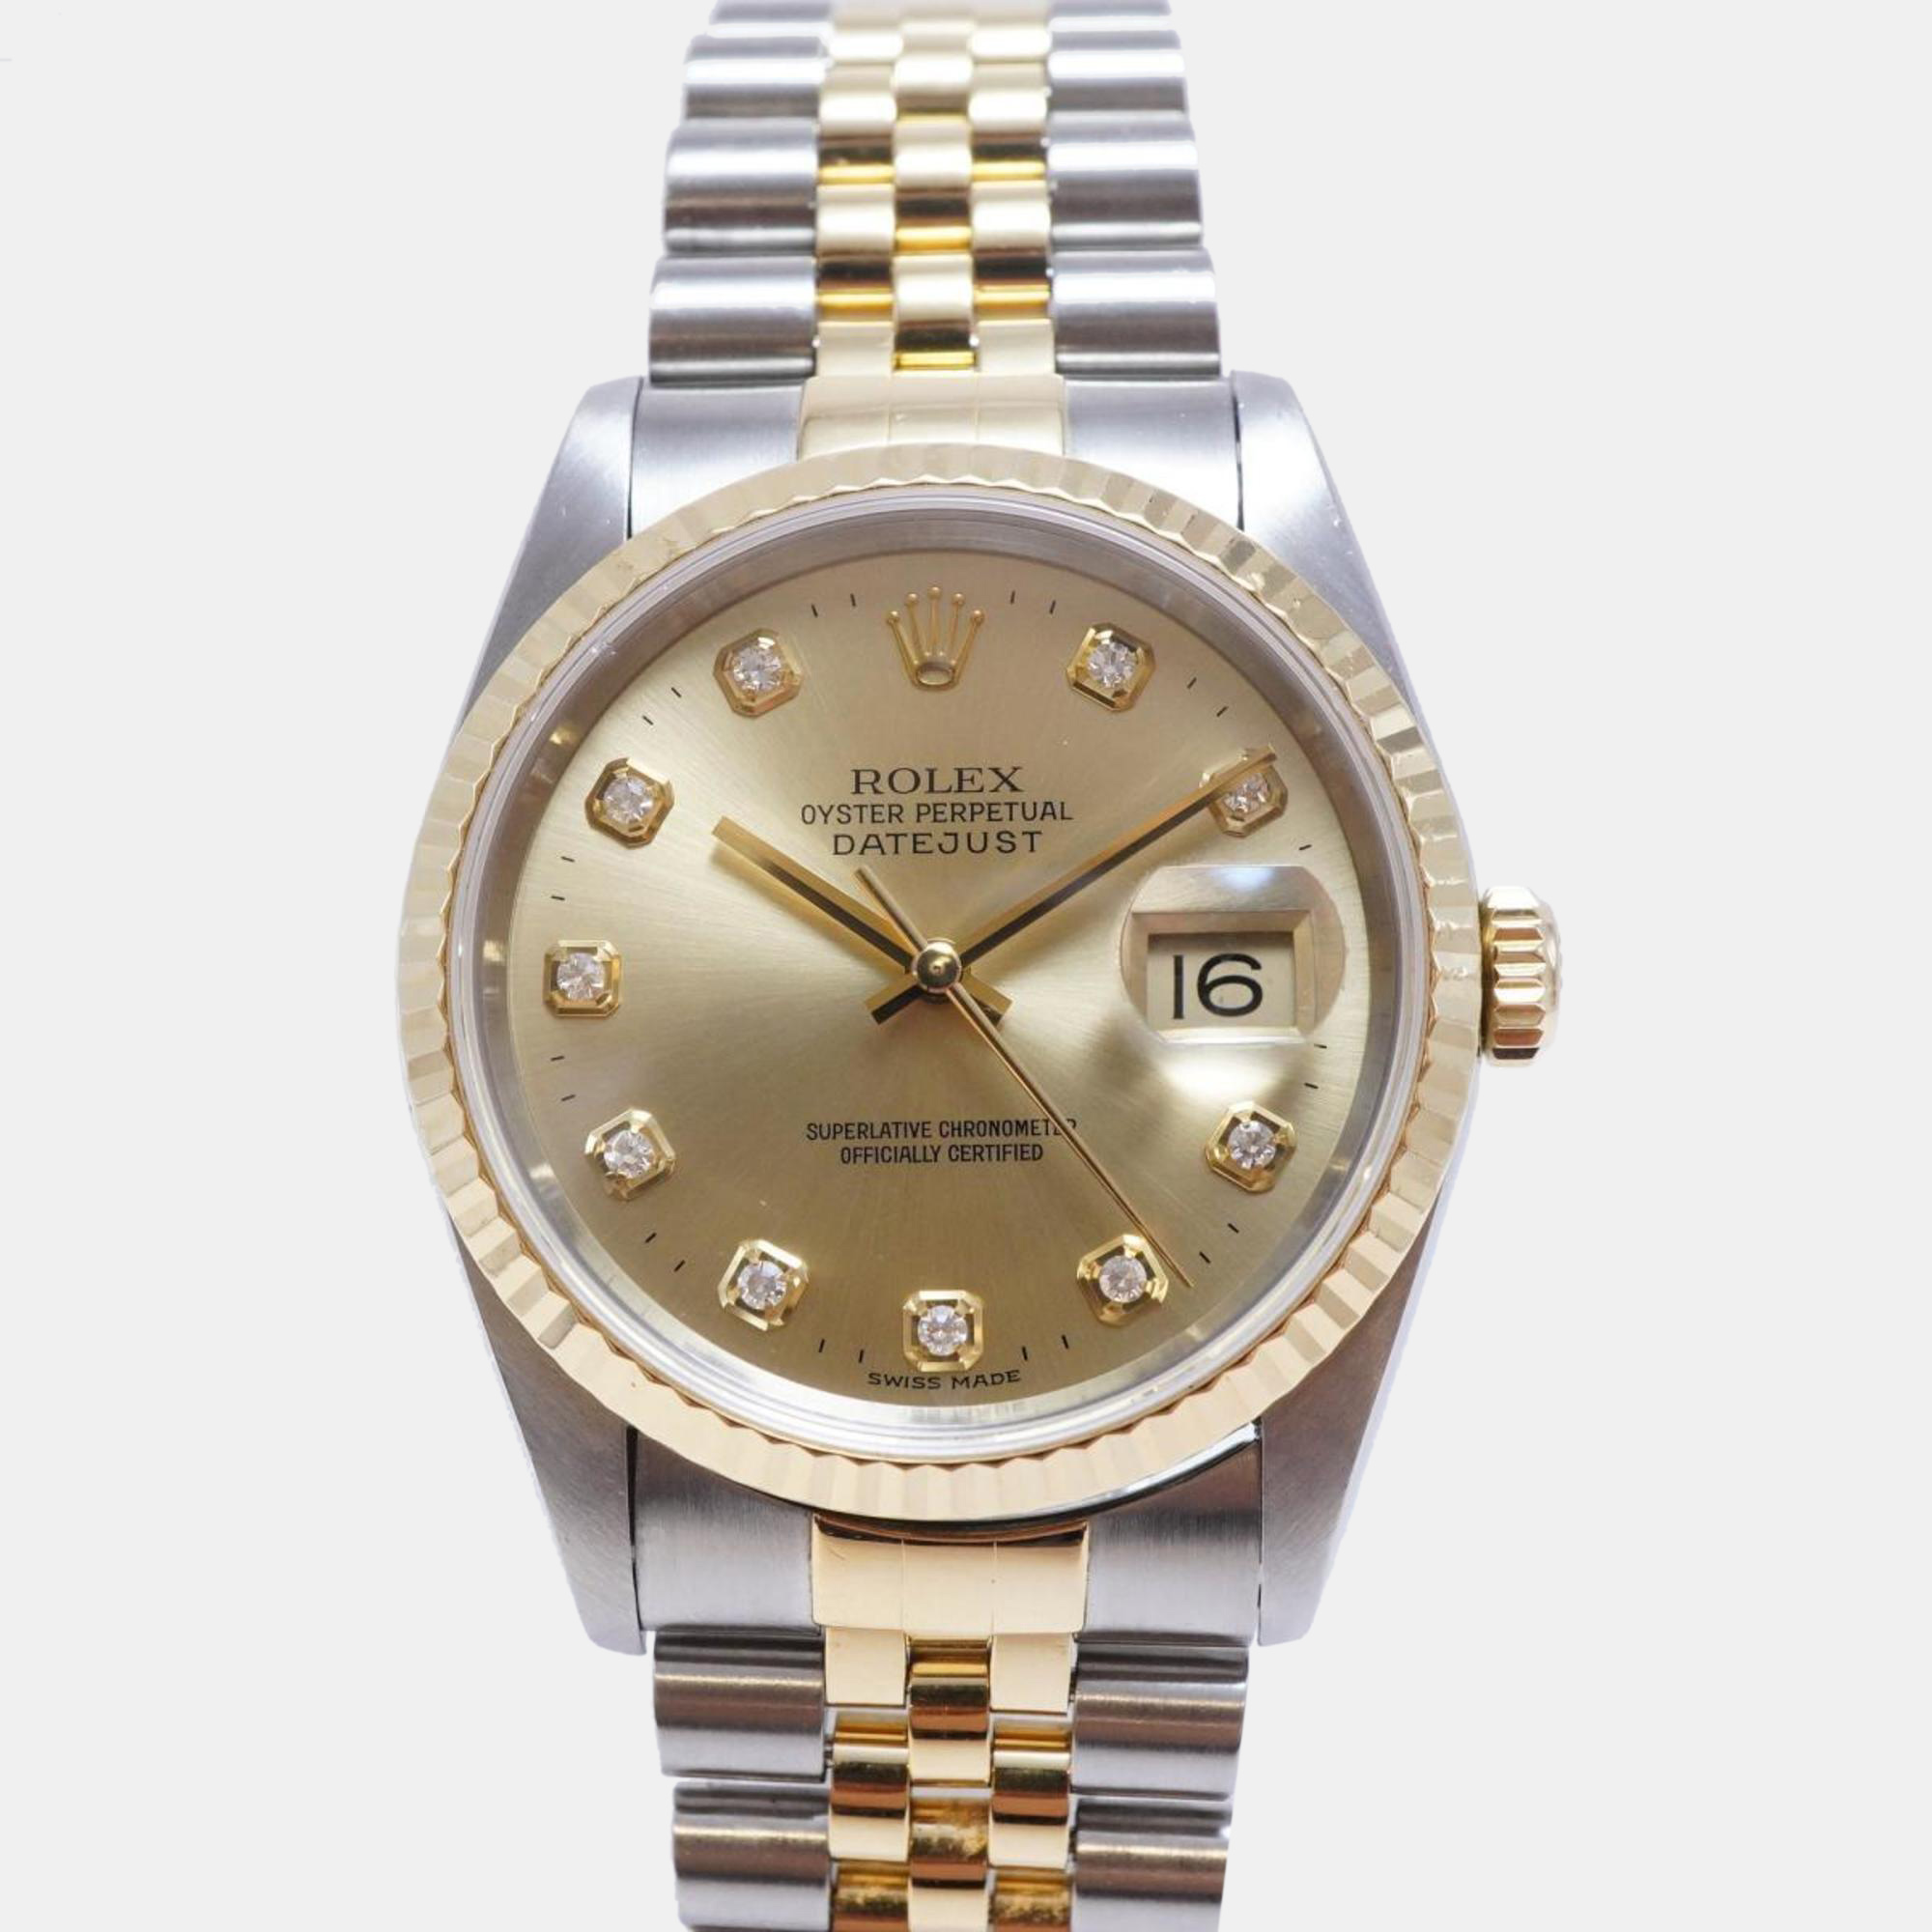 Pre-owned Rolex Gold 18k Yellow Gold And Stainless Steel Datejust 16233 Men's Wristwatch 35mm